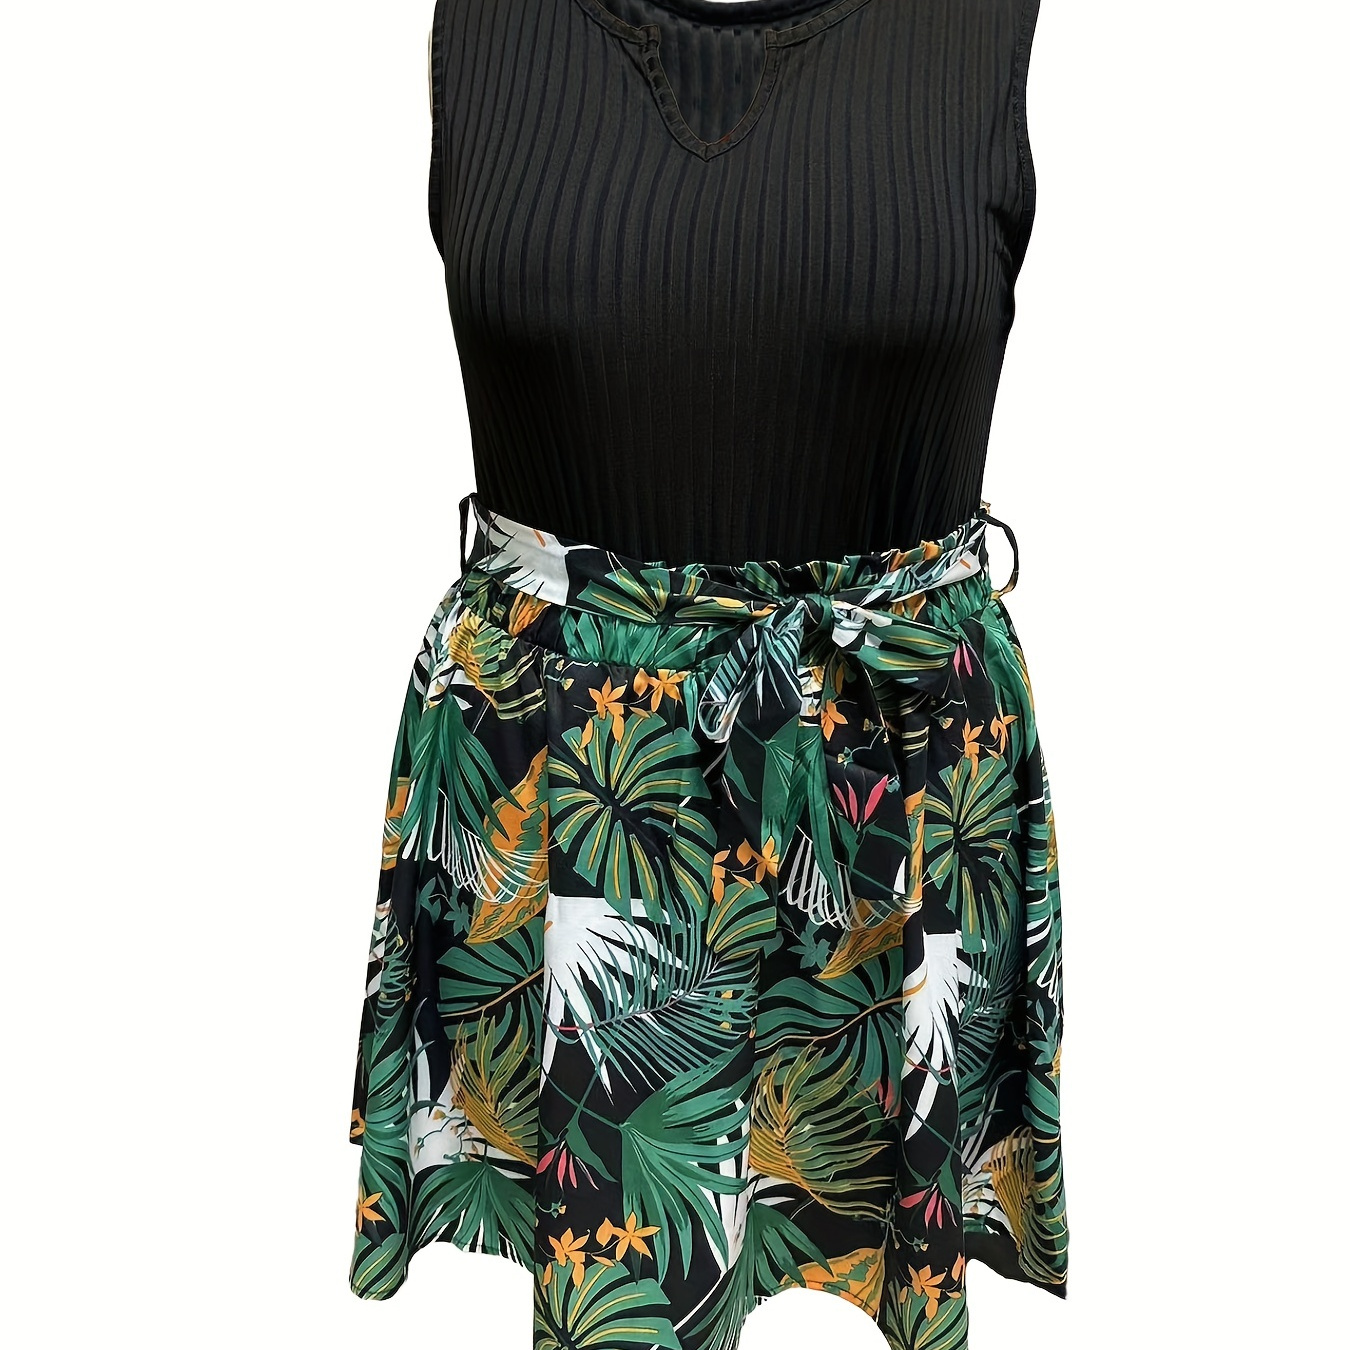 

Plus Size Vacay Outfits Set, Women's Plus Solid Notched Neck Medium Stretch Tank Top & Tropical Print Belted Skirt Outfits 2 Piece Set